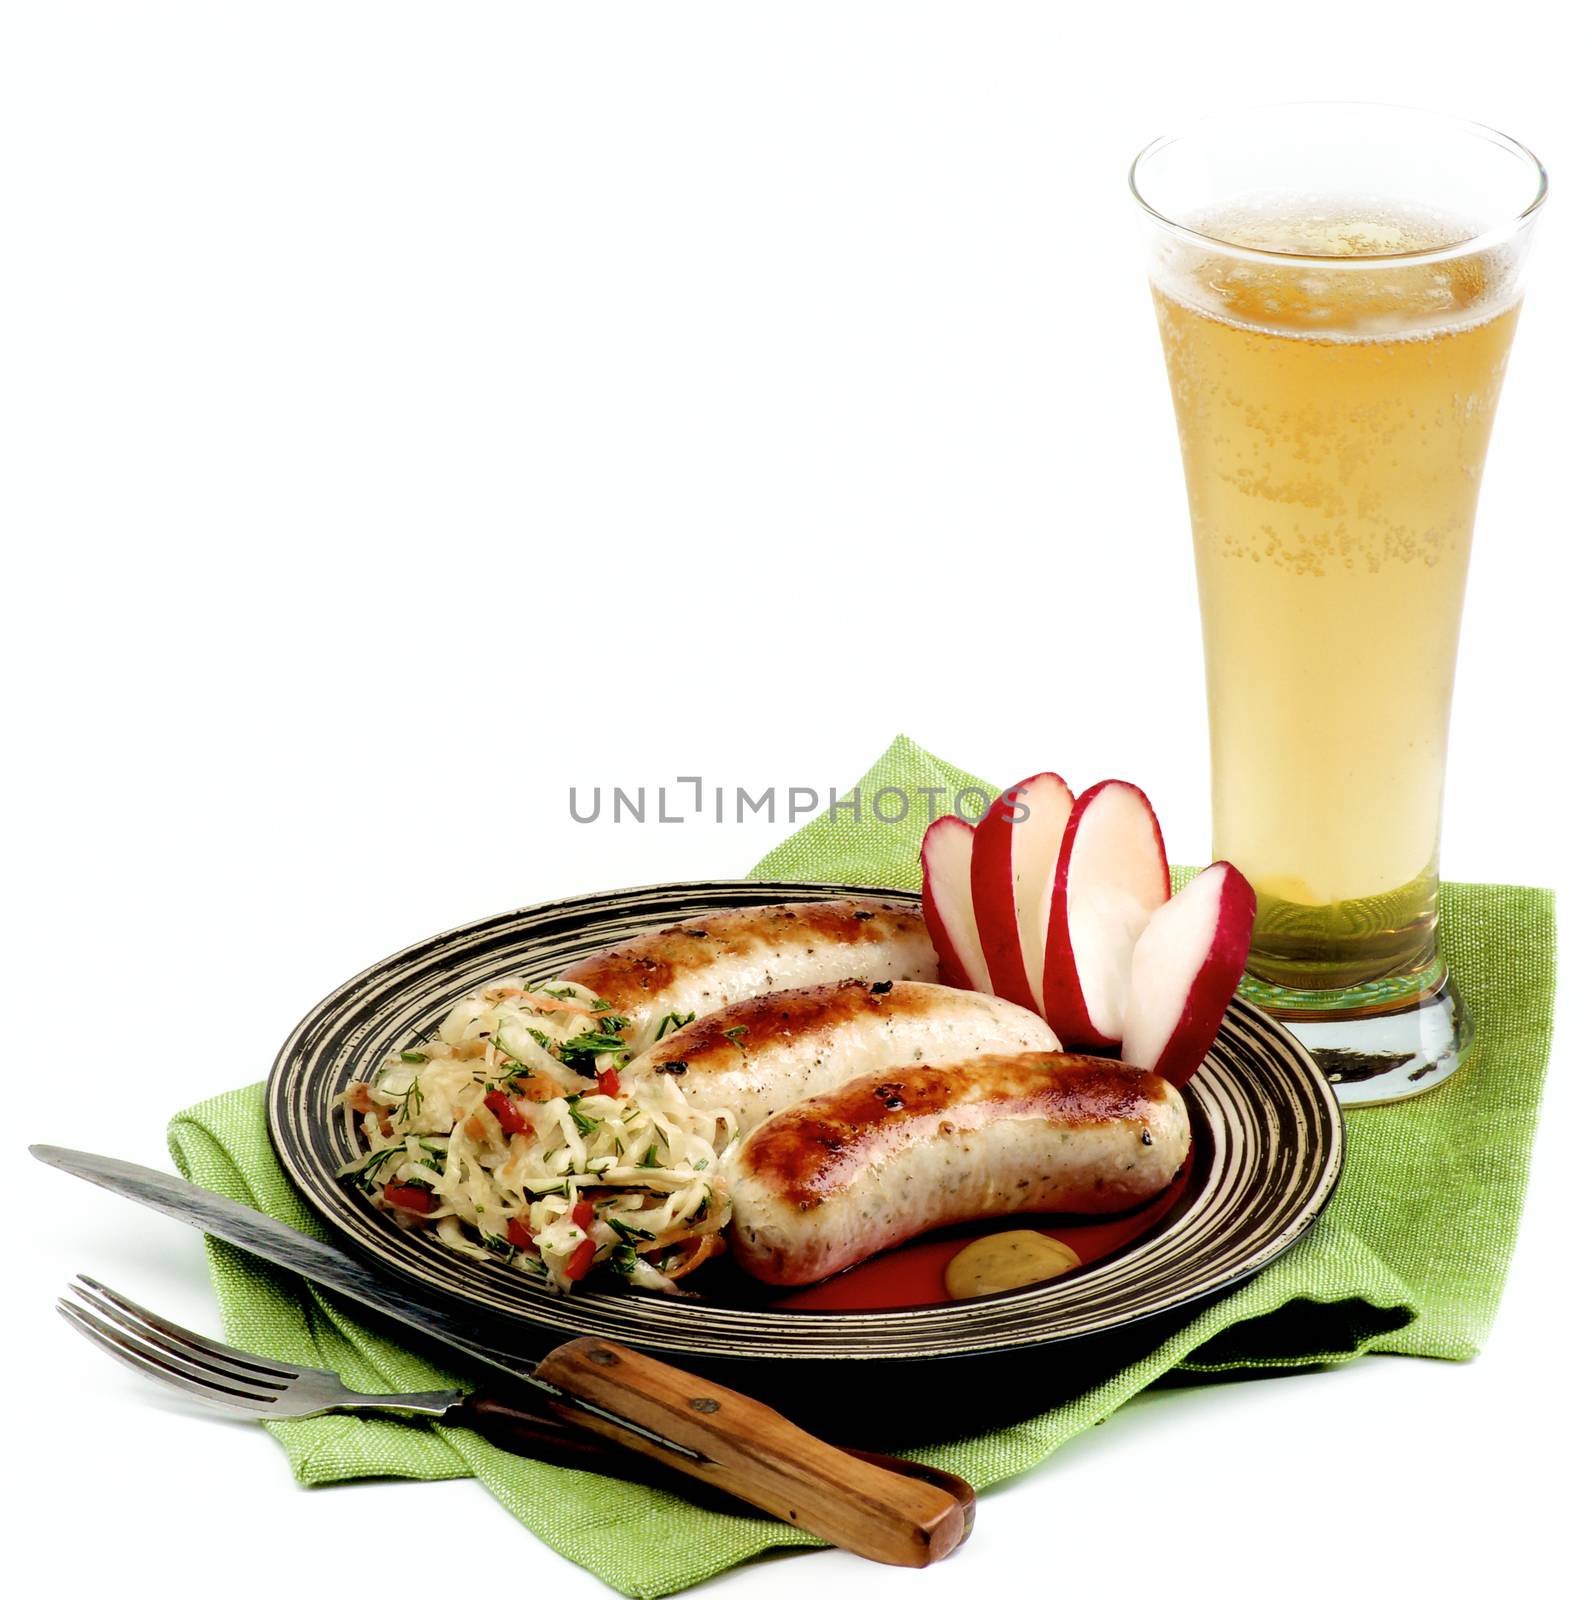 Delicious Grilled White Munich Sausages with Pickled Cabbage, Chopped Radish and Glass of Beer on Green Napkin isolated on White background